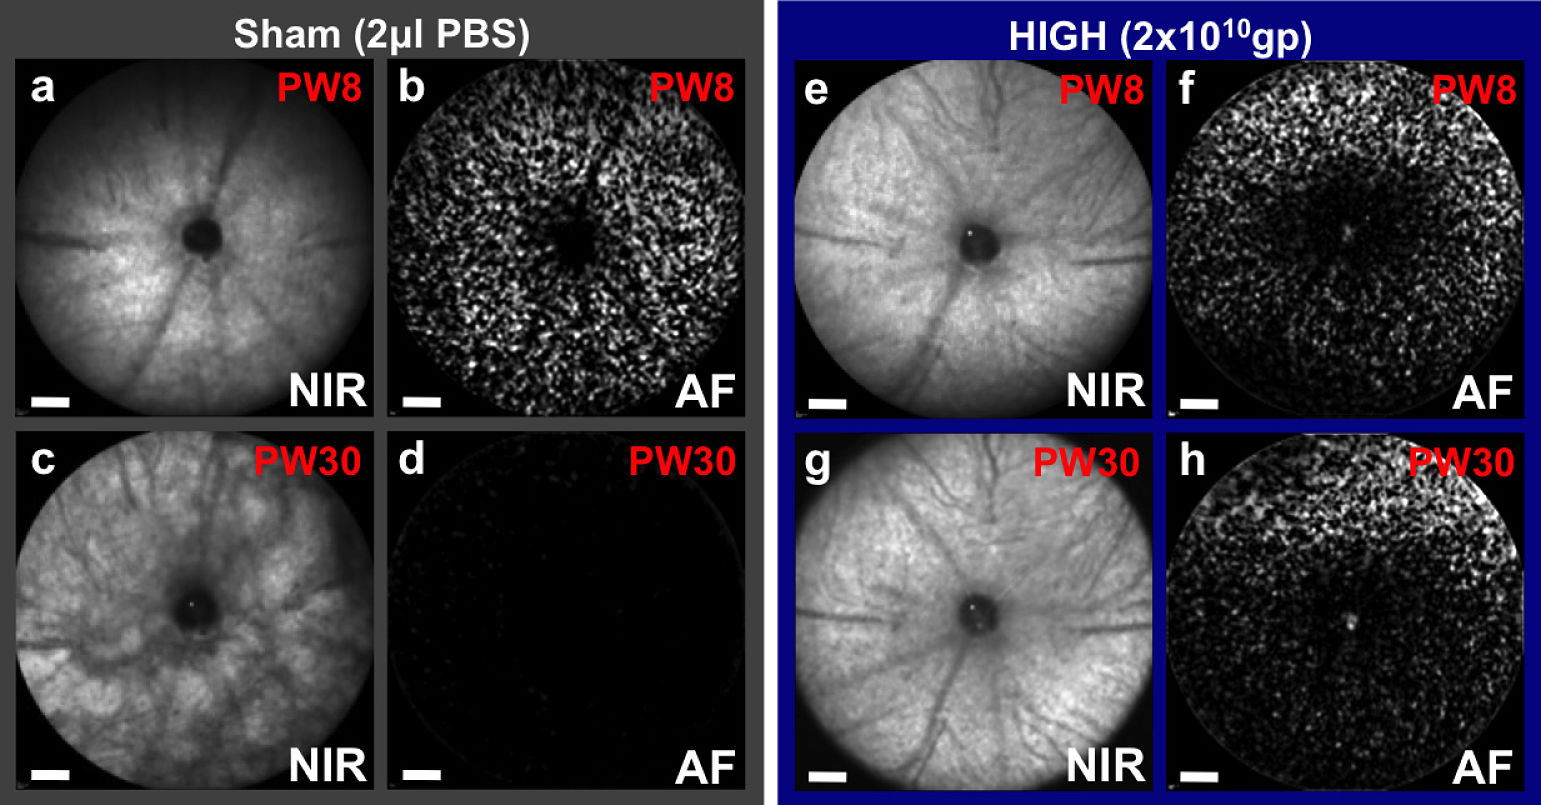 Gene therapy gives long-term protection to photoreceptor cells in a mouse model of retinitis pigmentosa